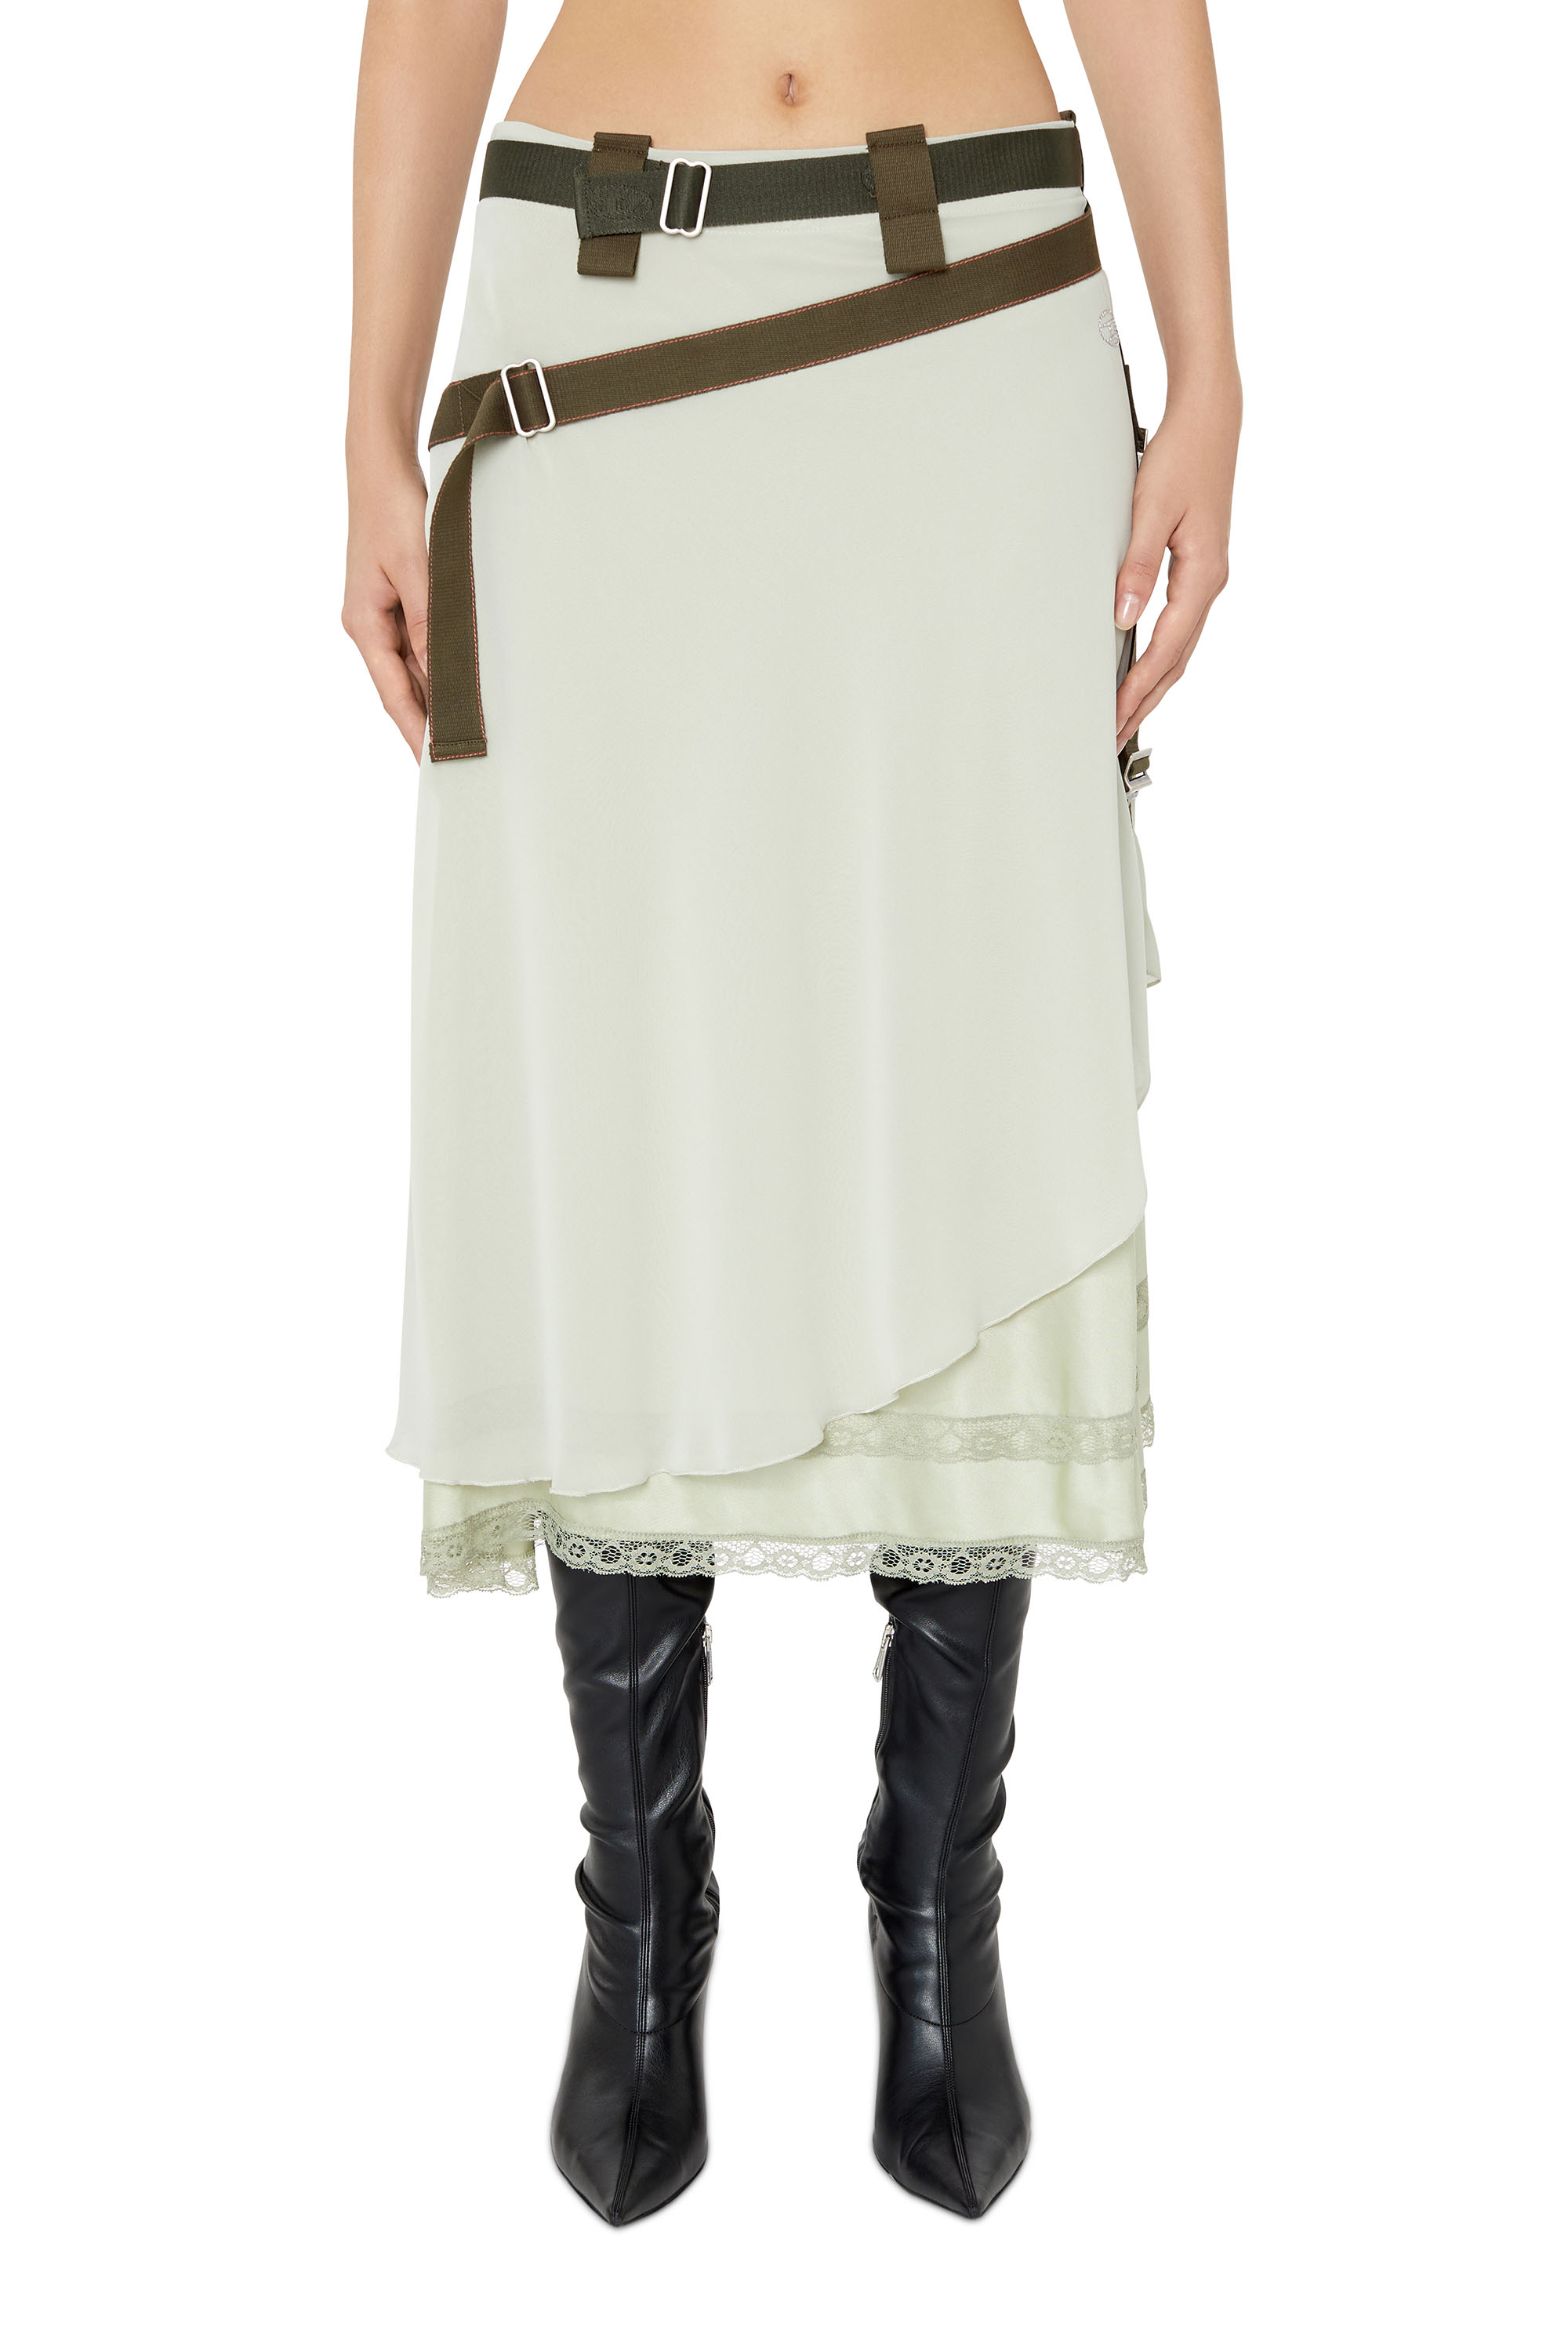 O-LEILANI Woman: Wrap skirt with tape straps | Diesel